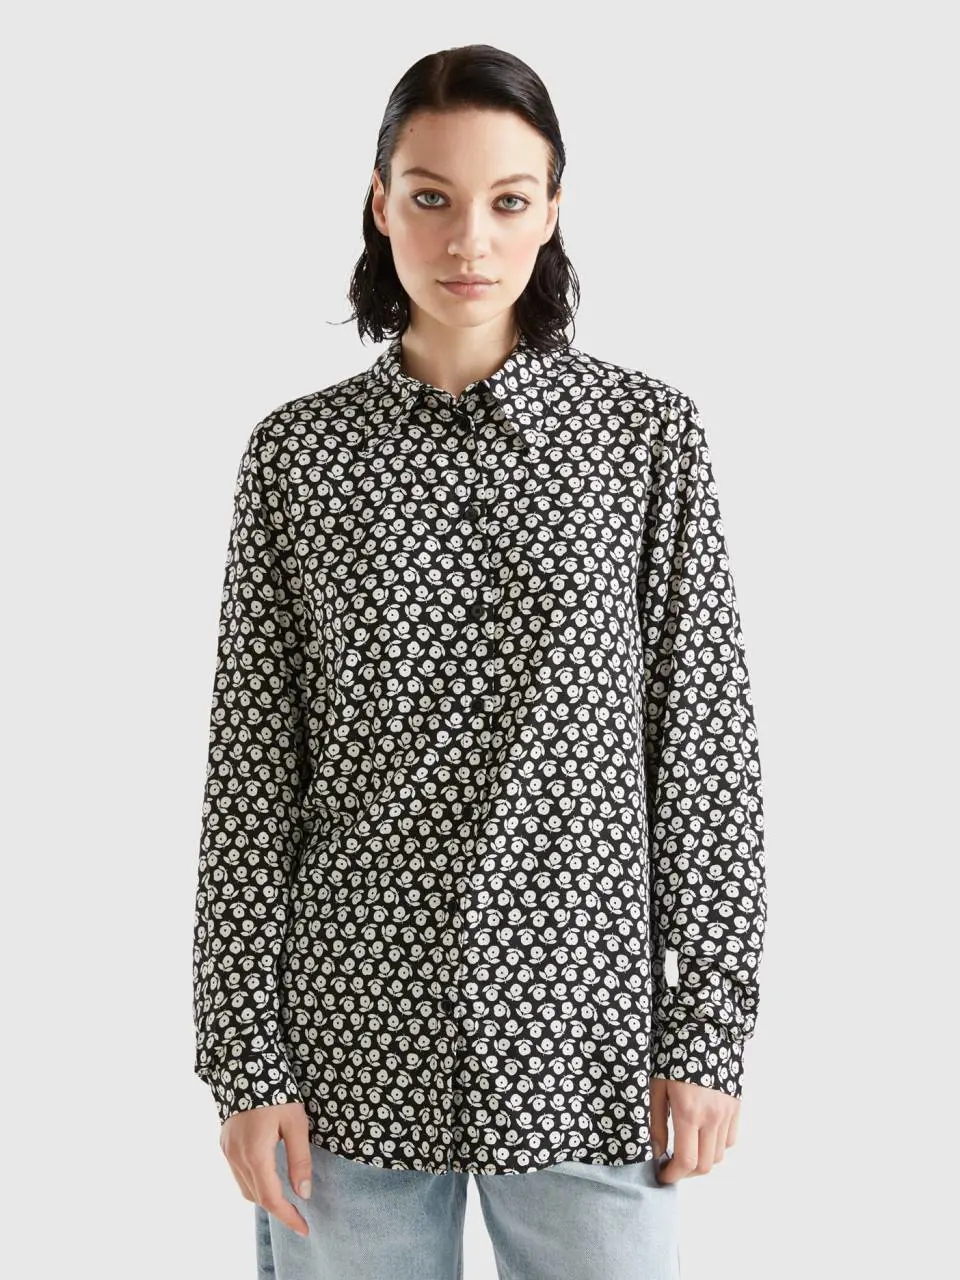 Benetton patterned shirt in sustainable viscose. 1